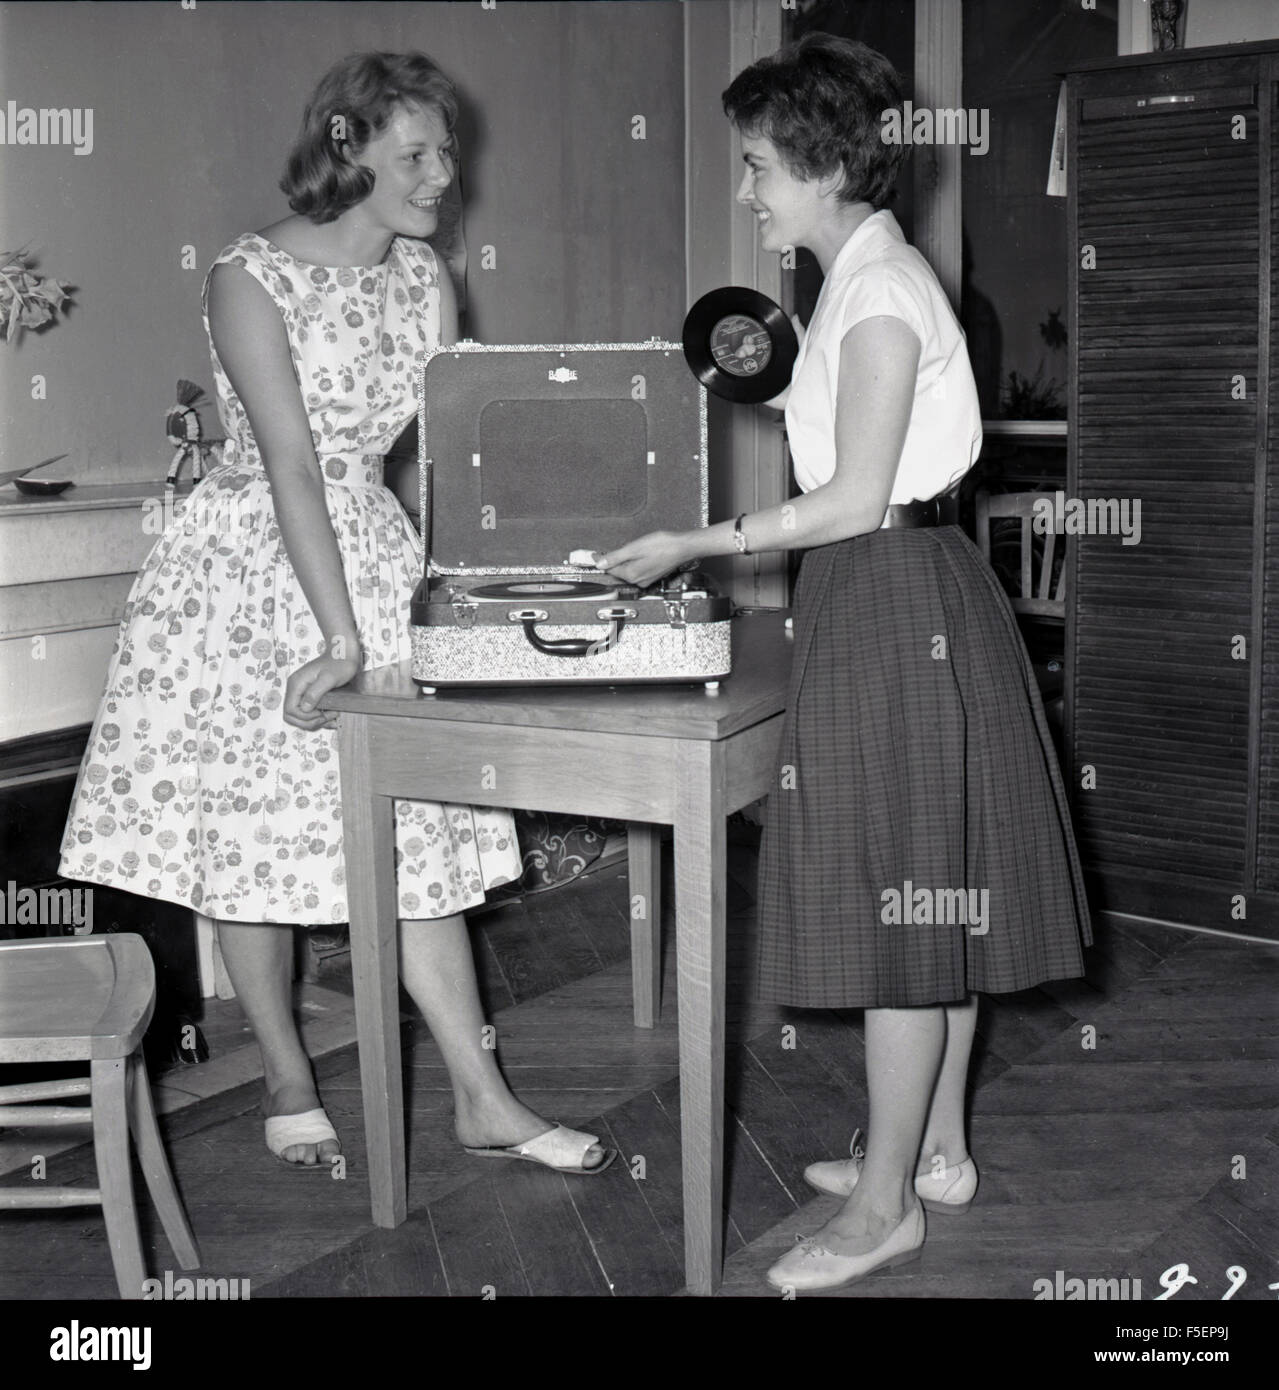 1950s historical picture of two young adult girls dressed in the clothes of the era, excited at playing an LP or vinyl record on a small portable record player. Stock Photo